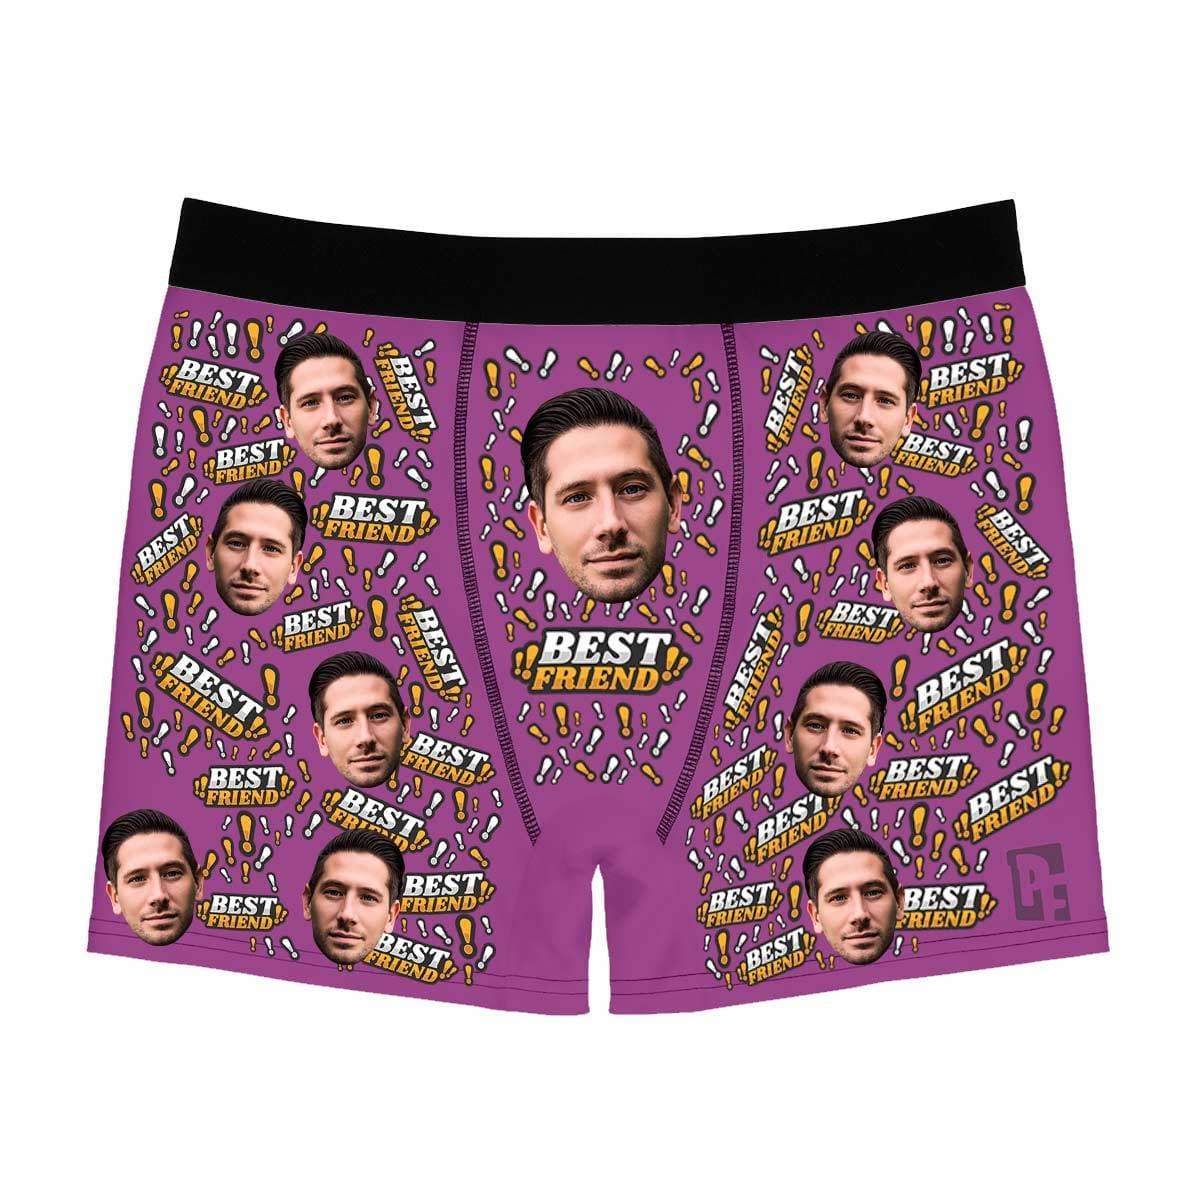 Purple Best Friend men's boxer briefs personalized with photo printed on them